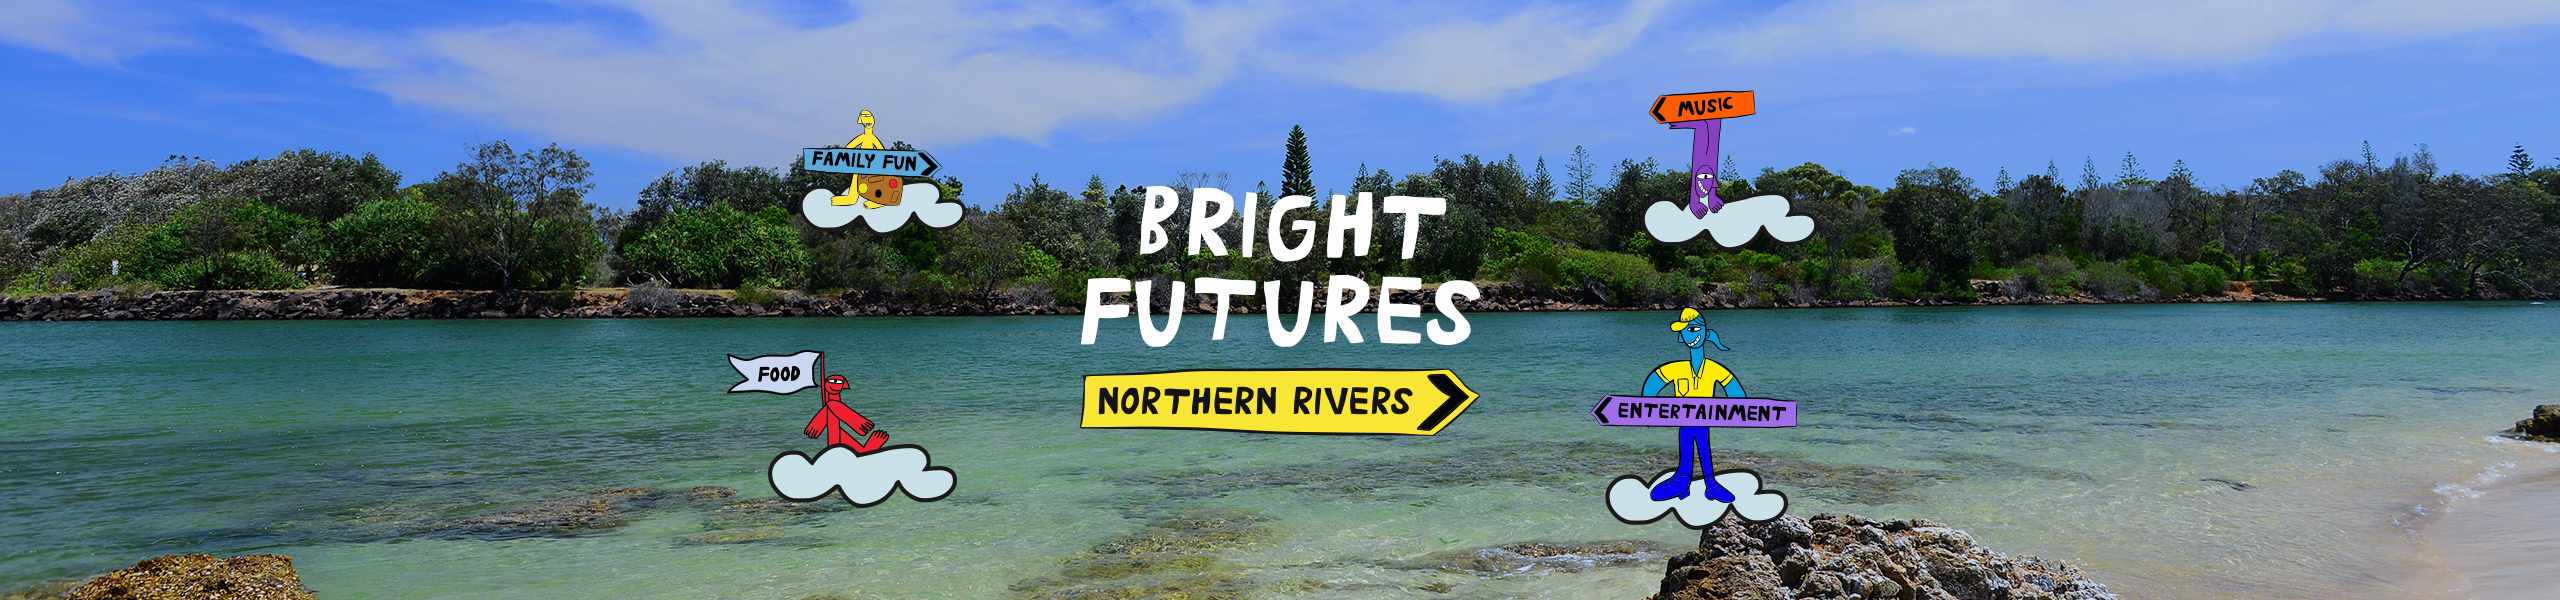 Northern Rivers NRMA event